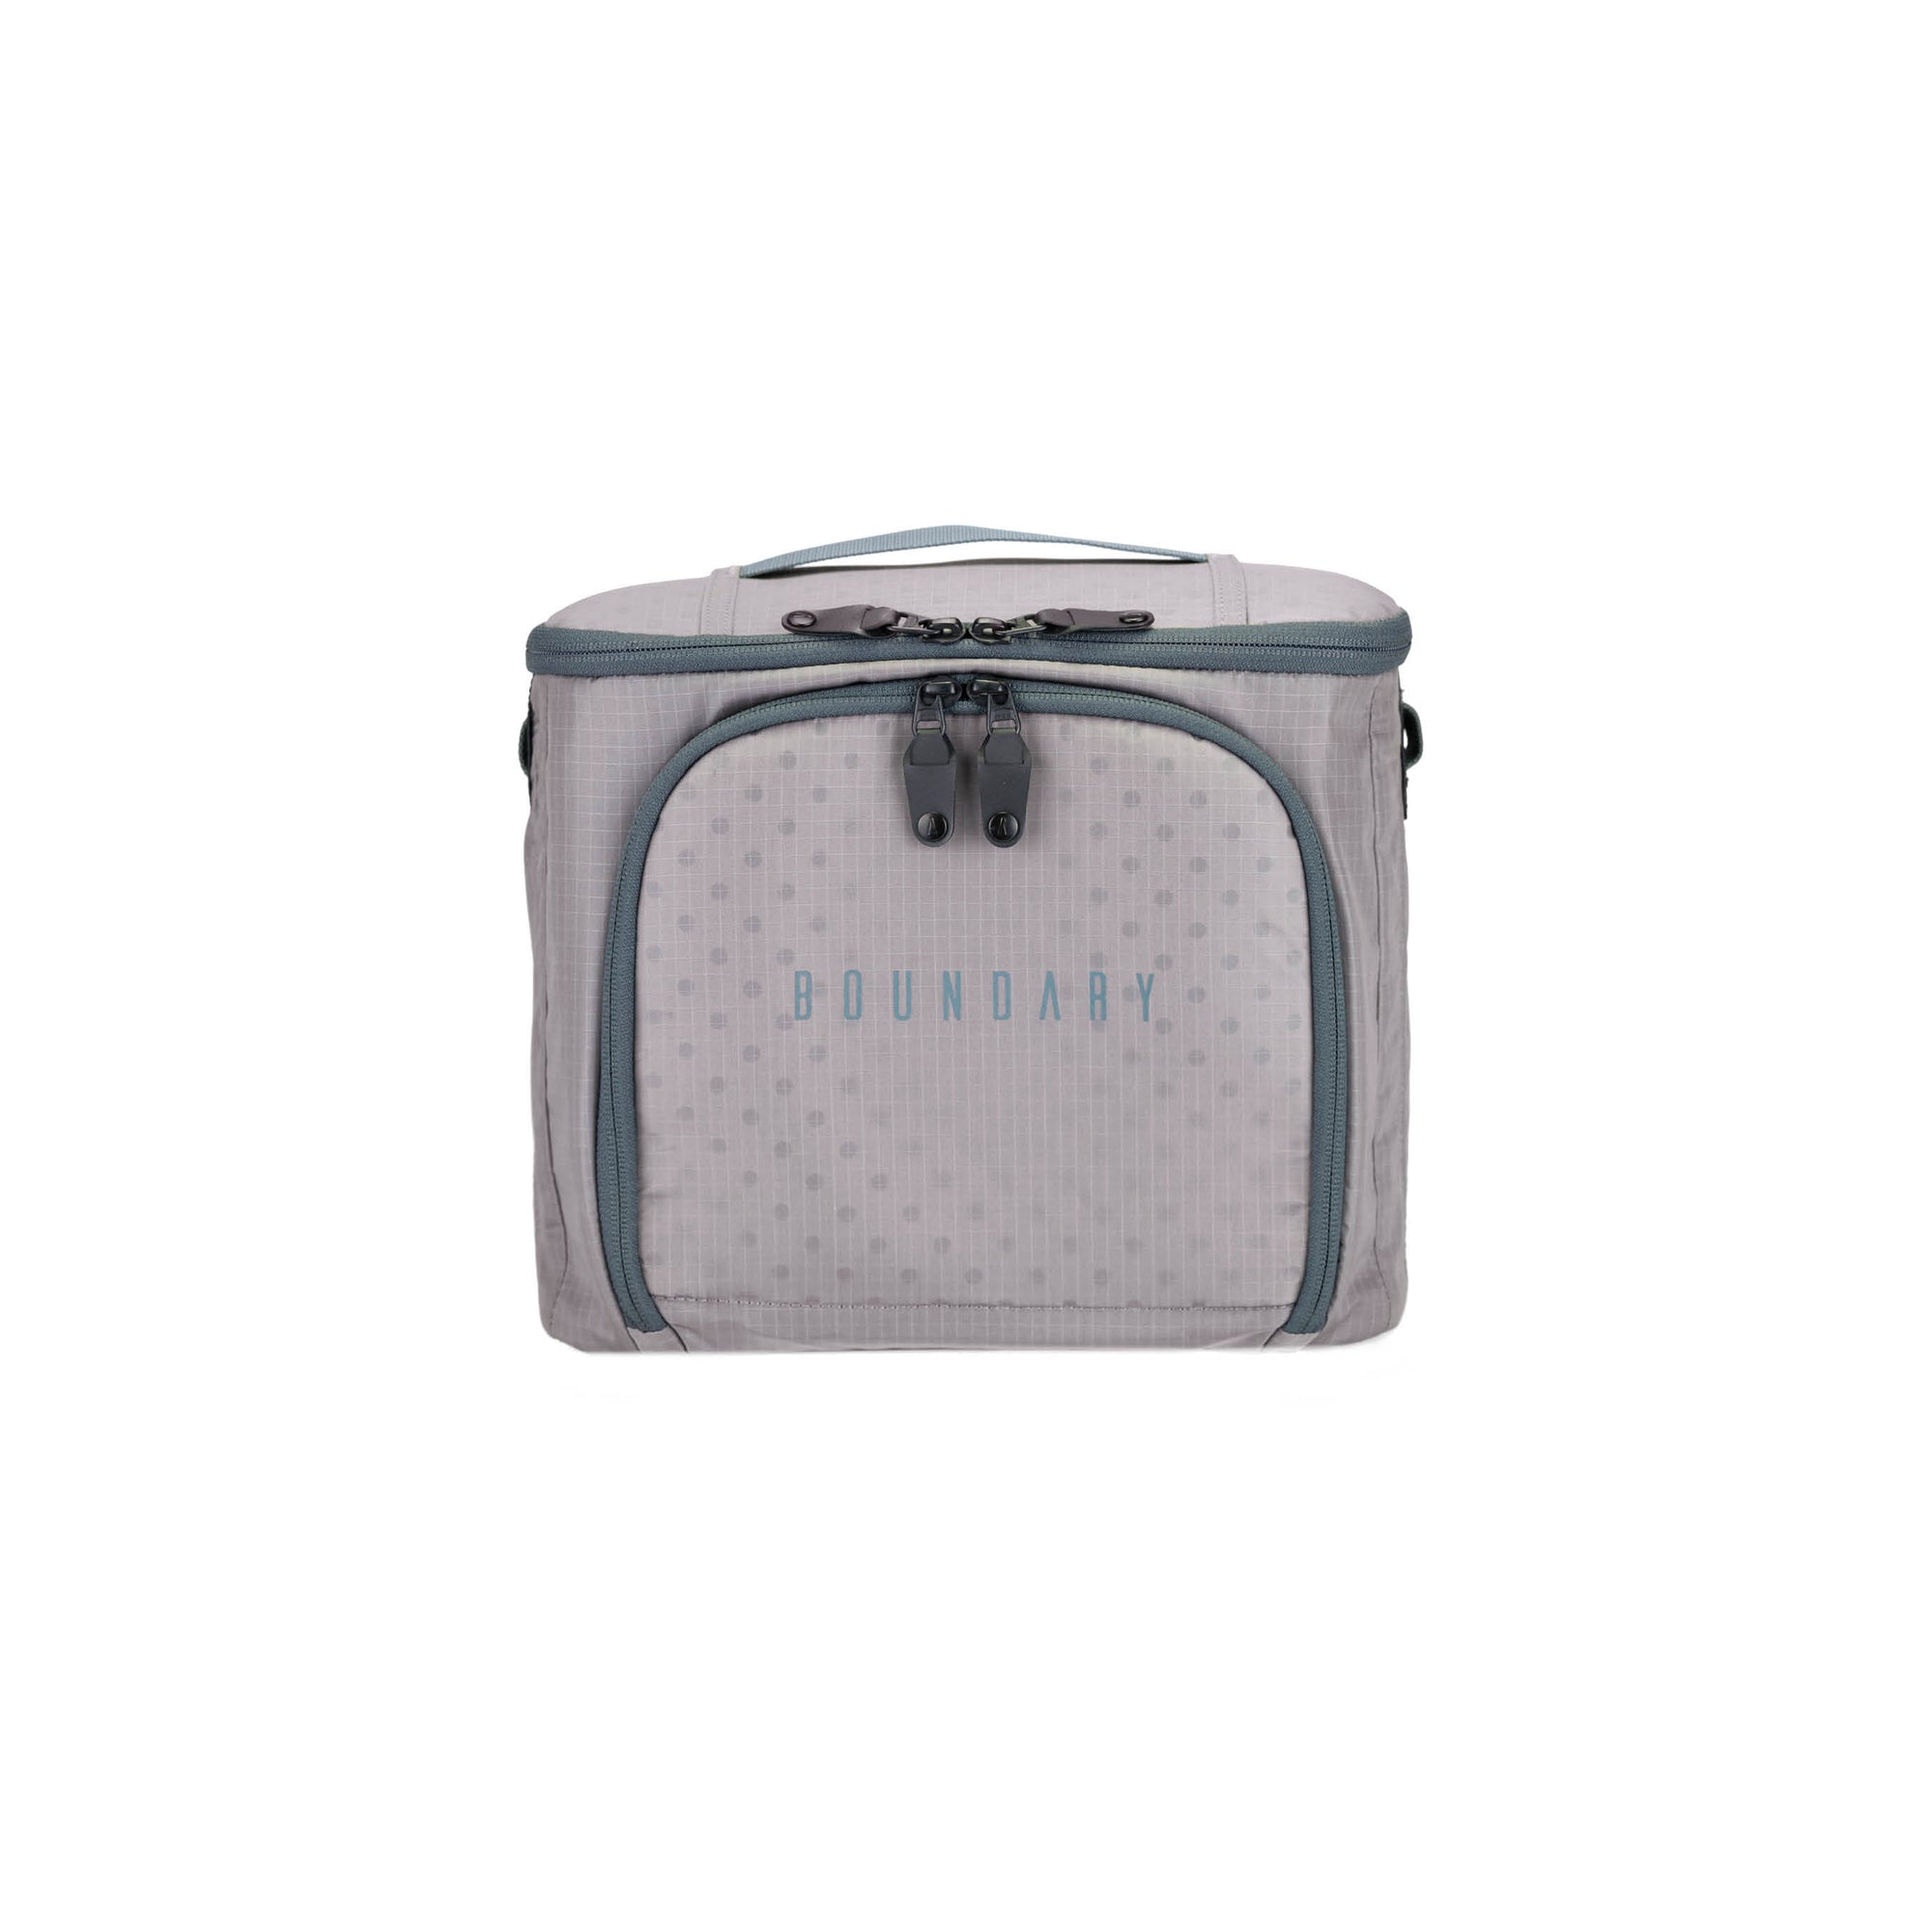 Square Divided Lunch Boxes, New Zealand, lunch box, party, DEAL OF THE  DAY